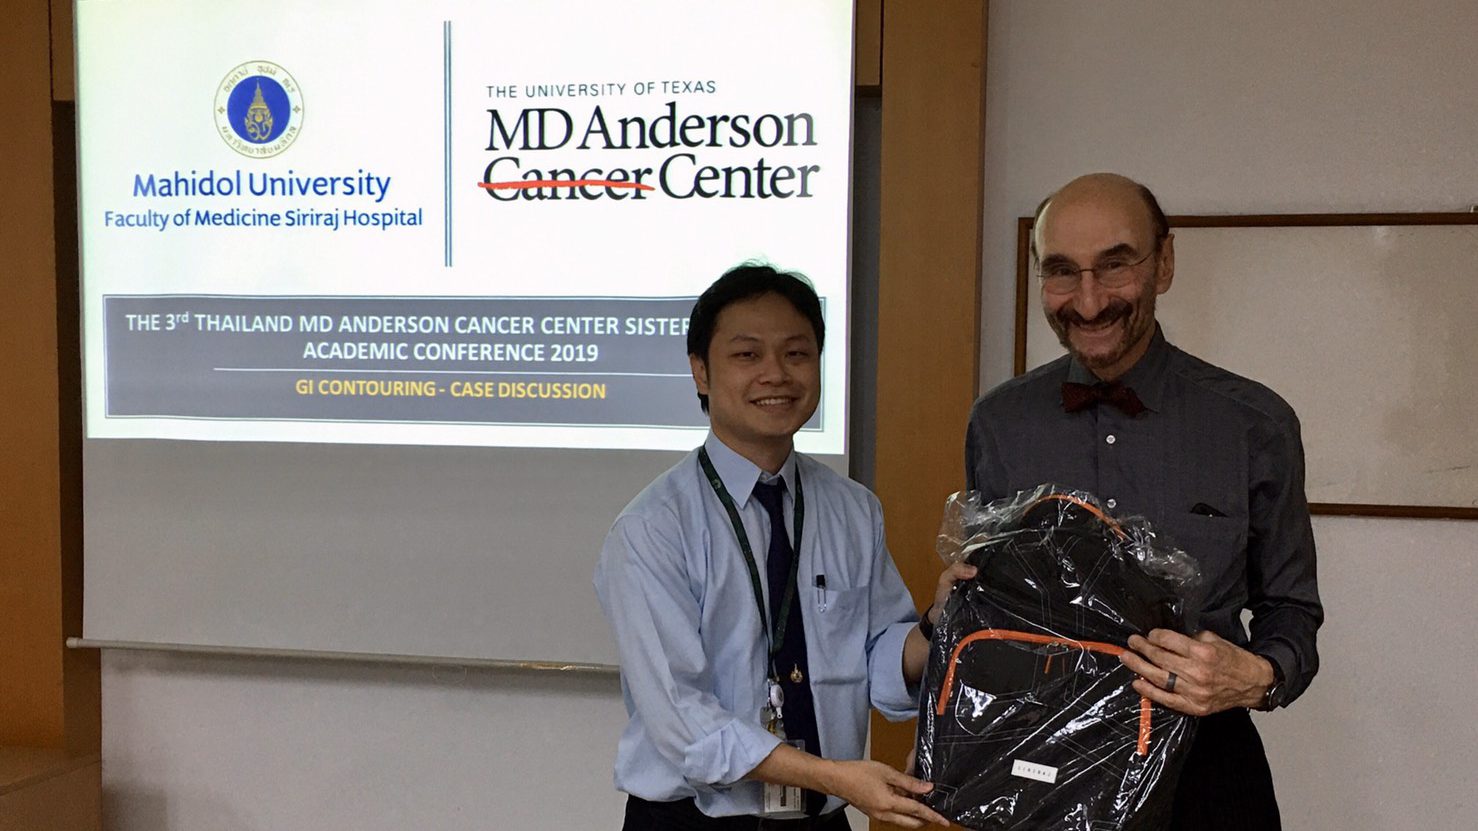 The 3rd Thailand MD Anderson Cancer Center Sister Institute Academic Conference 2019